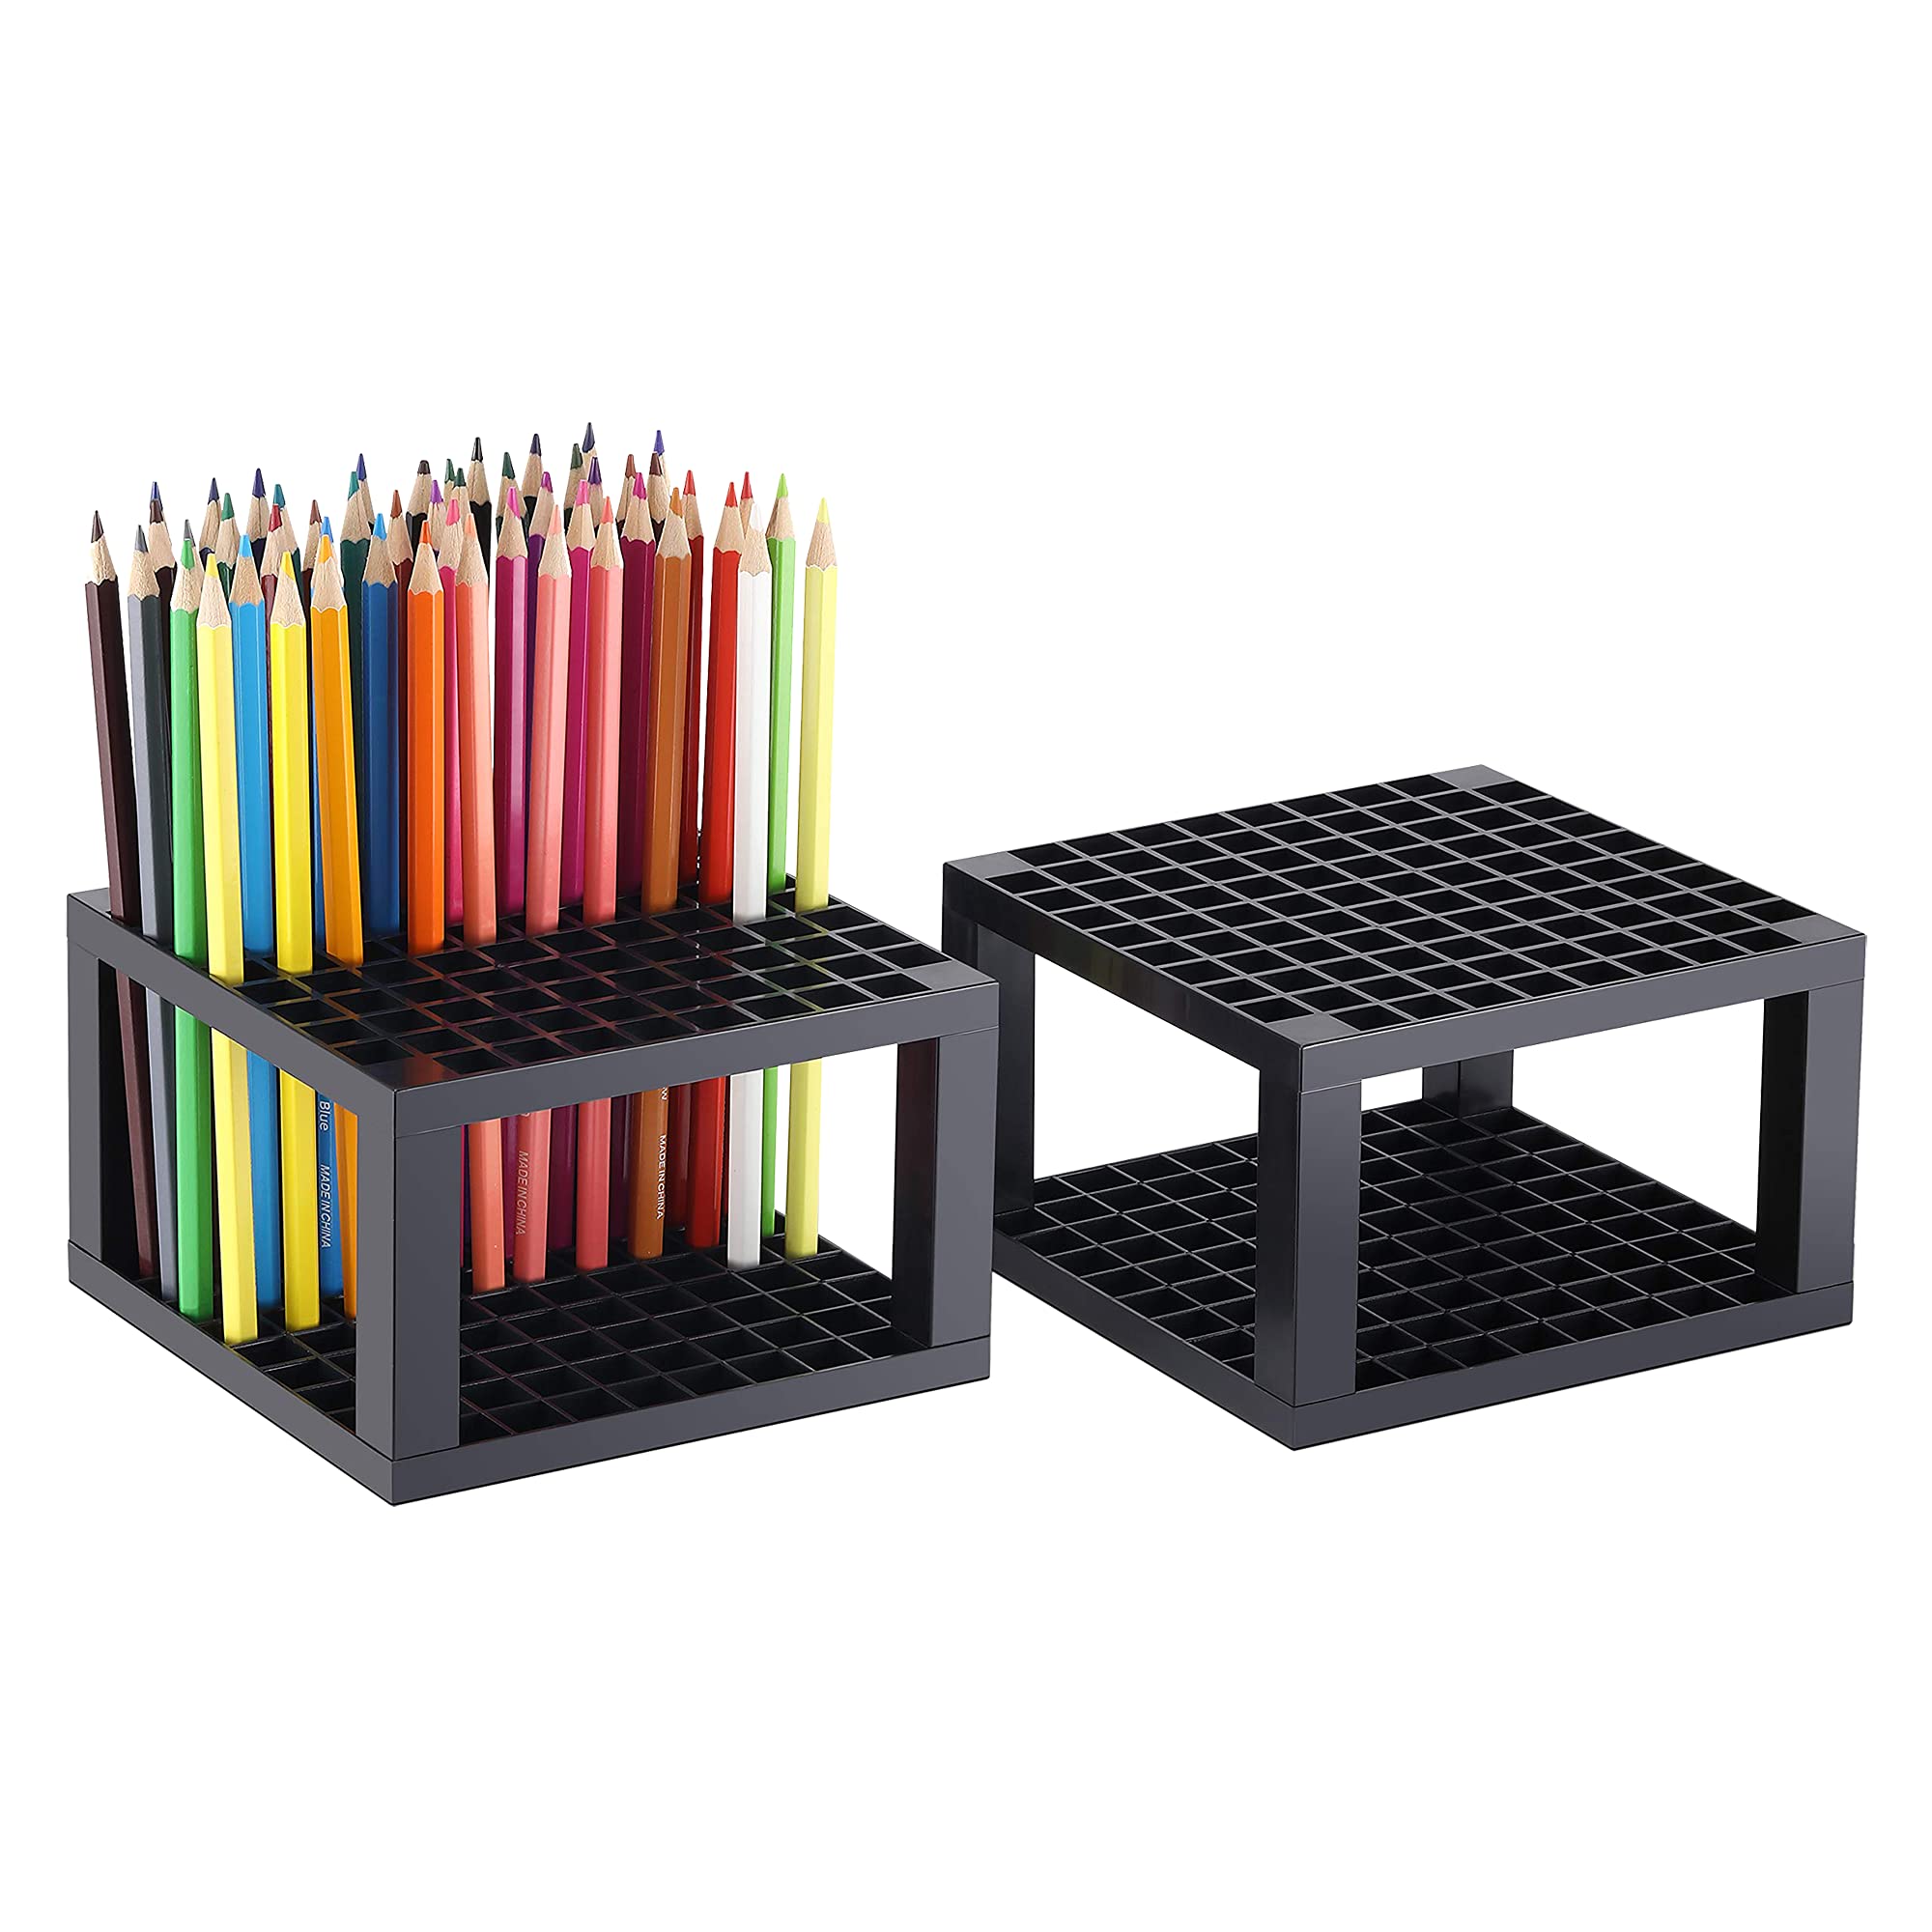 CAXXA 2 Pack 96 Hole Art Plastic Pencil & Brush Holder Desk Stand Organizer  Holder for Pens Paint Brushes Colored Pencils Markers (2 Pack) 2 Units